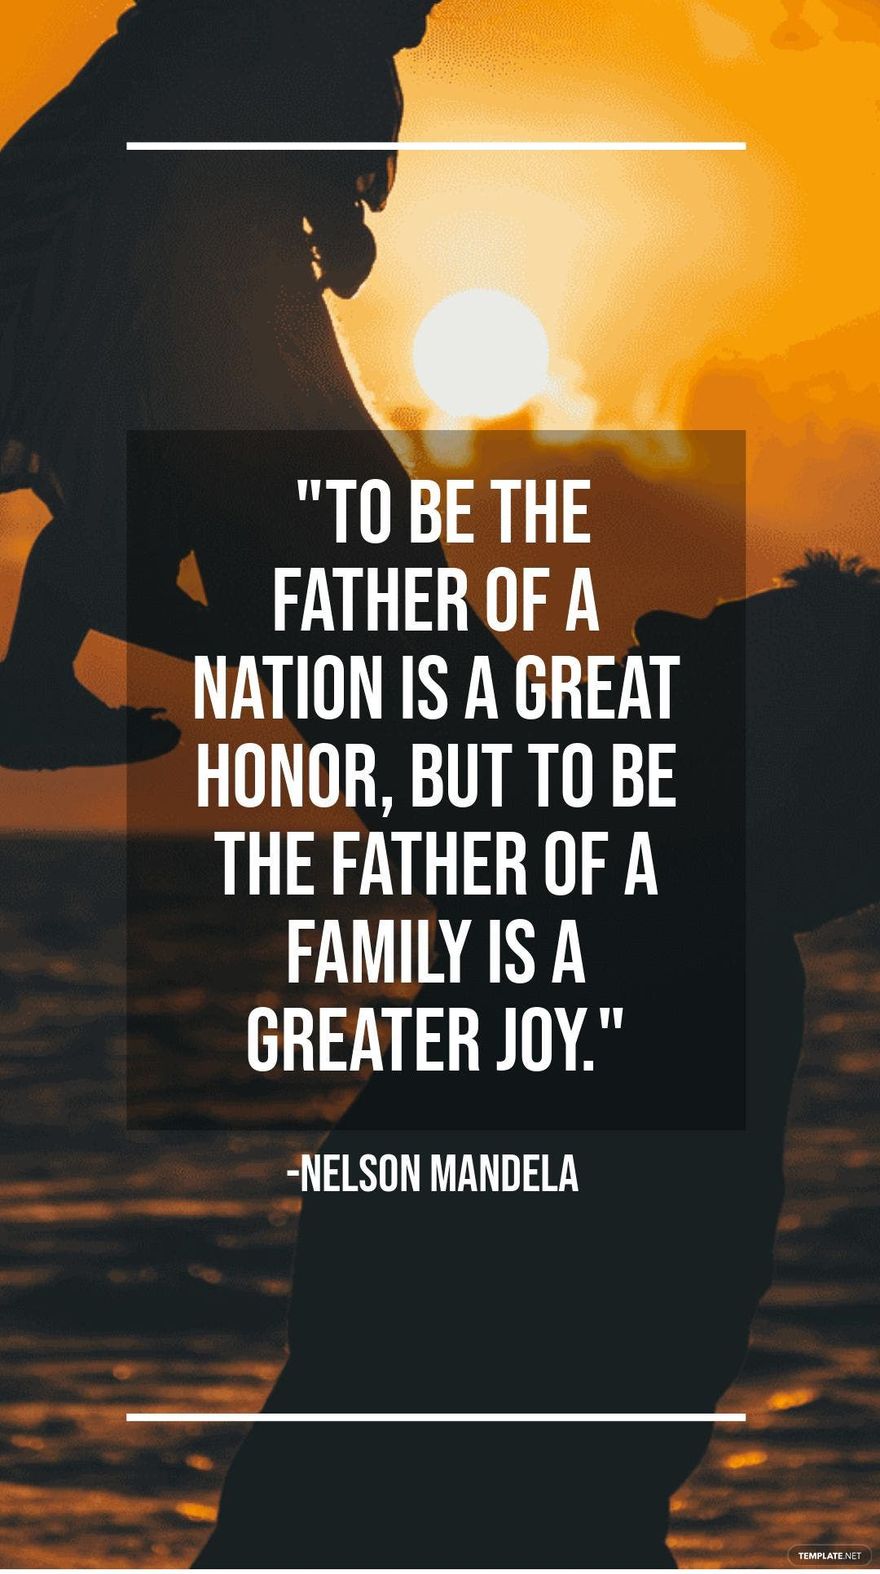 Free Nelson Mandela - "To be the father of a nation is a great honor, but to be the father of a family is a greater joy." in JPG